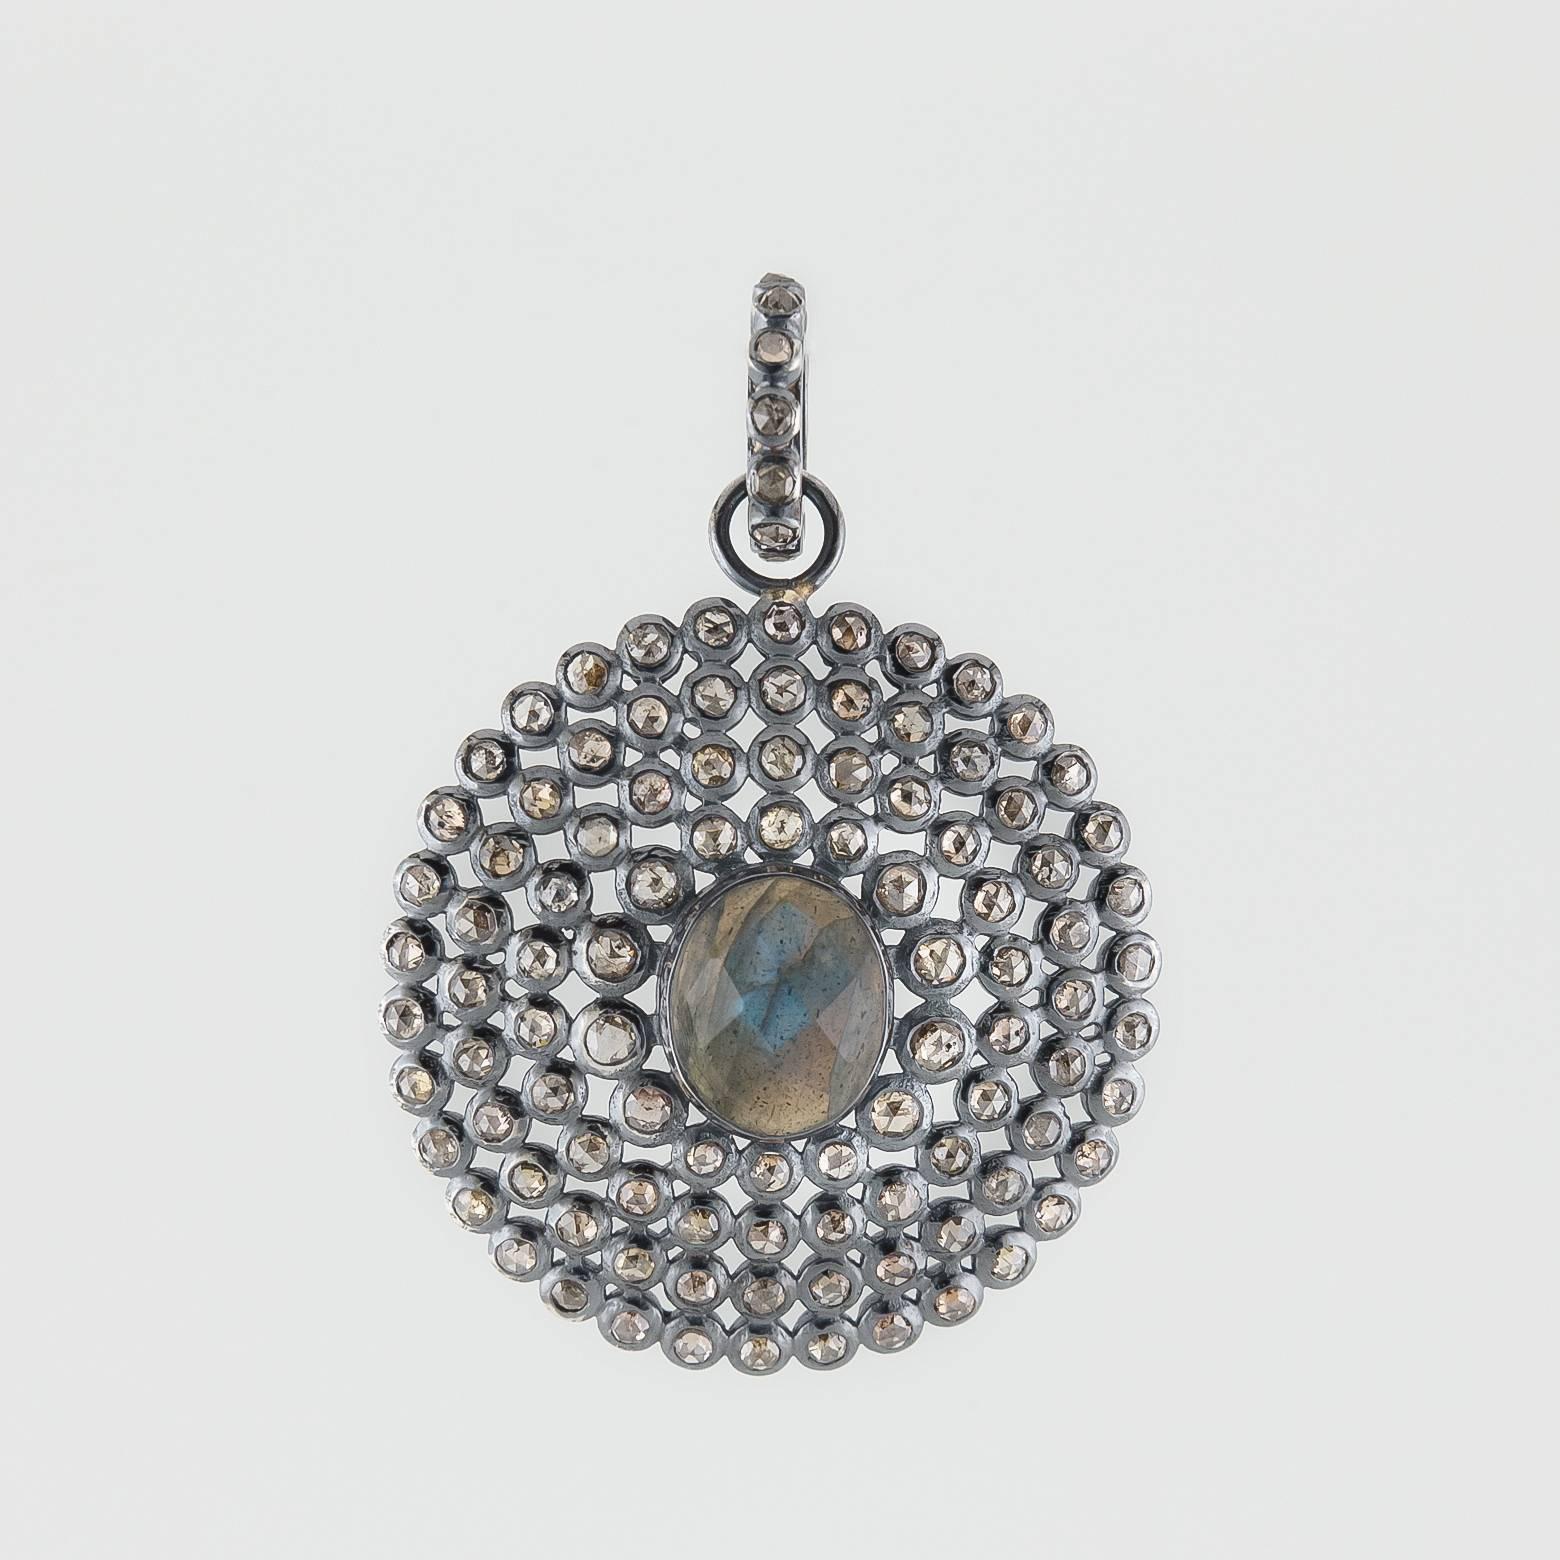 Diamonds Galore! This stunning diamond and labradorite pendant has so many diamonds you can't even keep track! They glow from across the room and accentuate the unique glow of this gorgeous labradorite! The oxidized sterling silver lets that sparkle